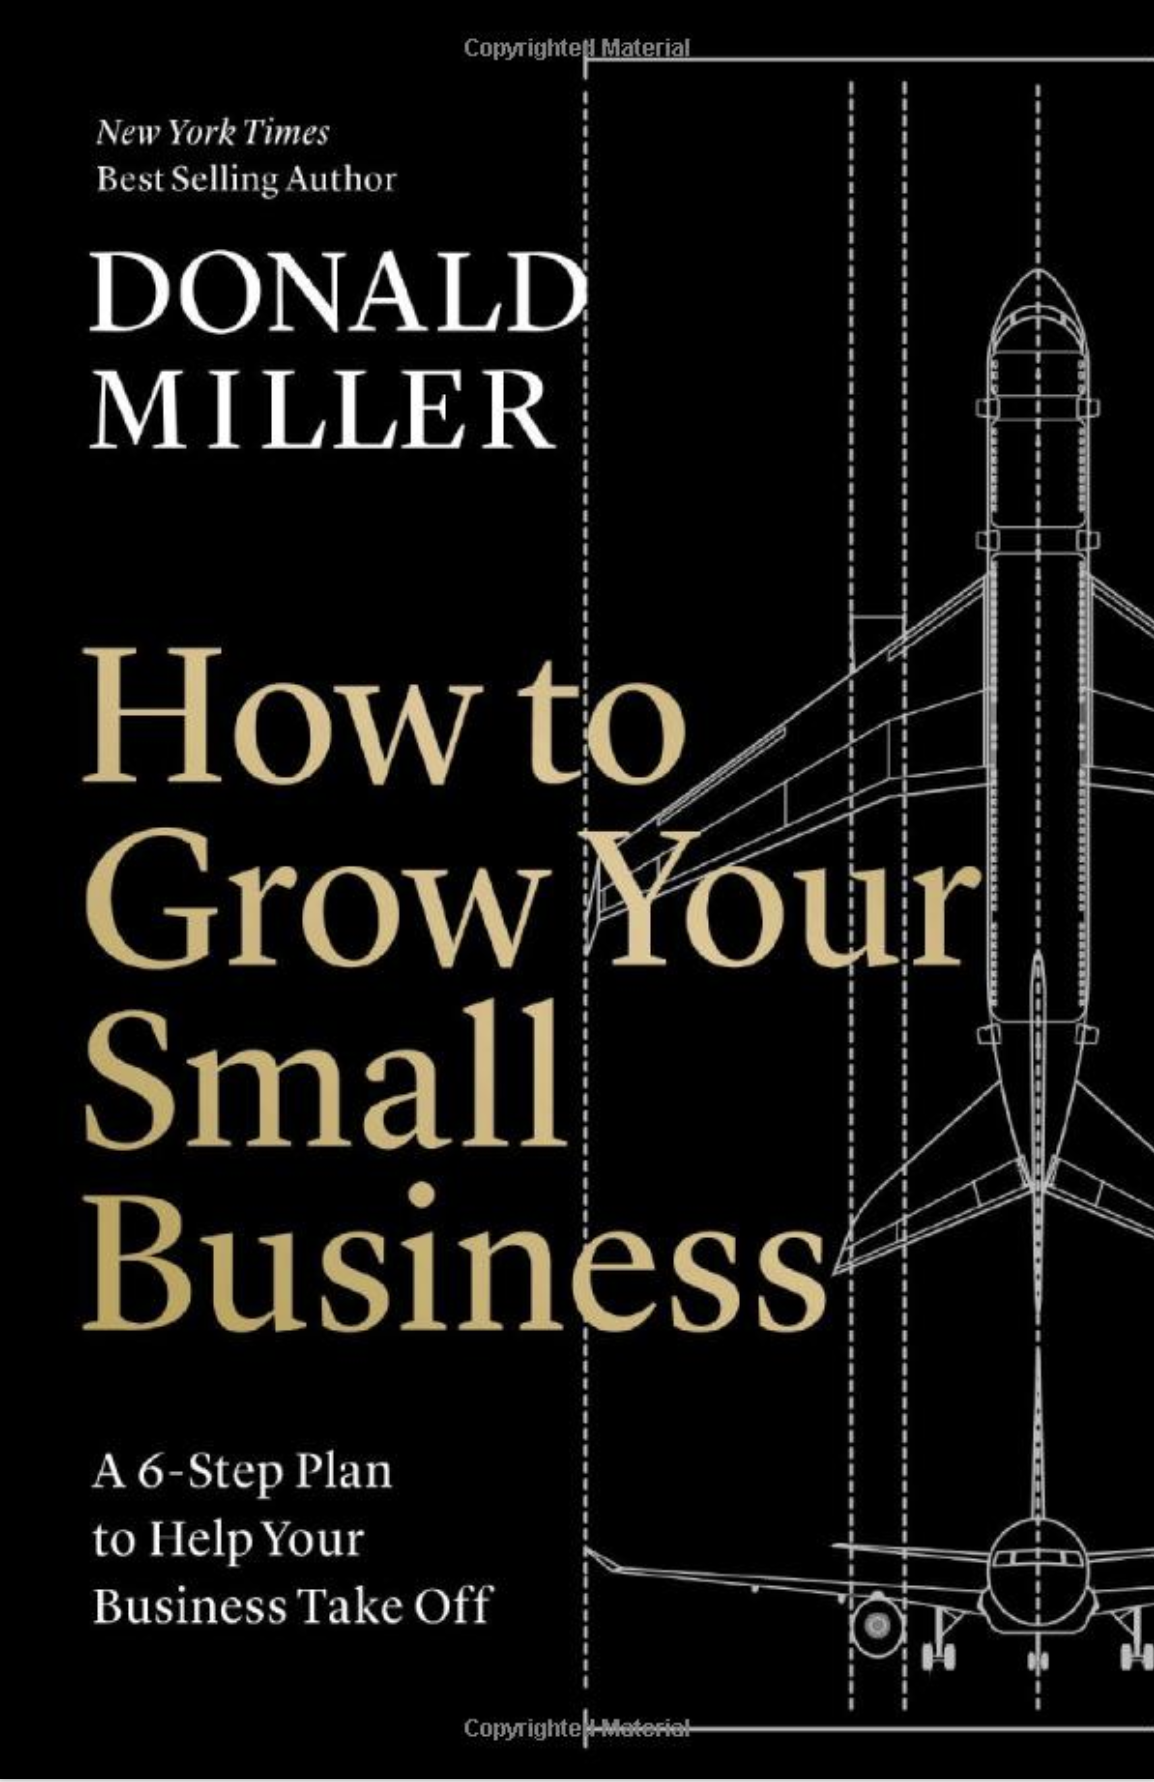 How to Grow Your Small Business Book